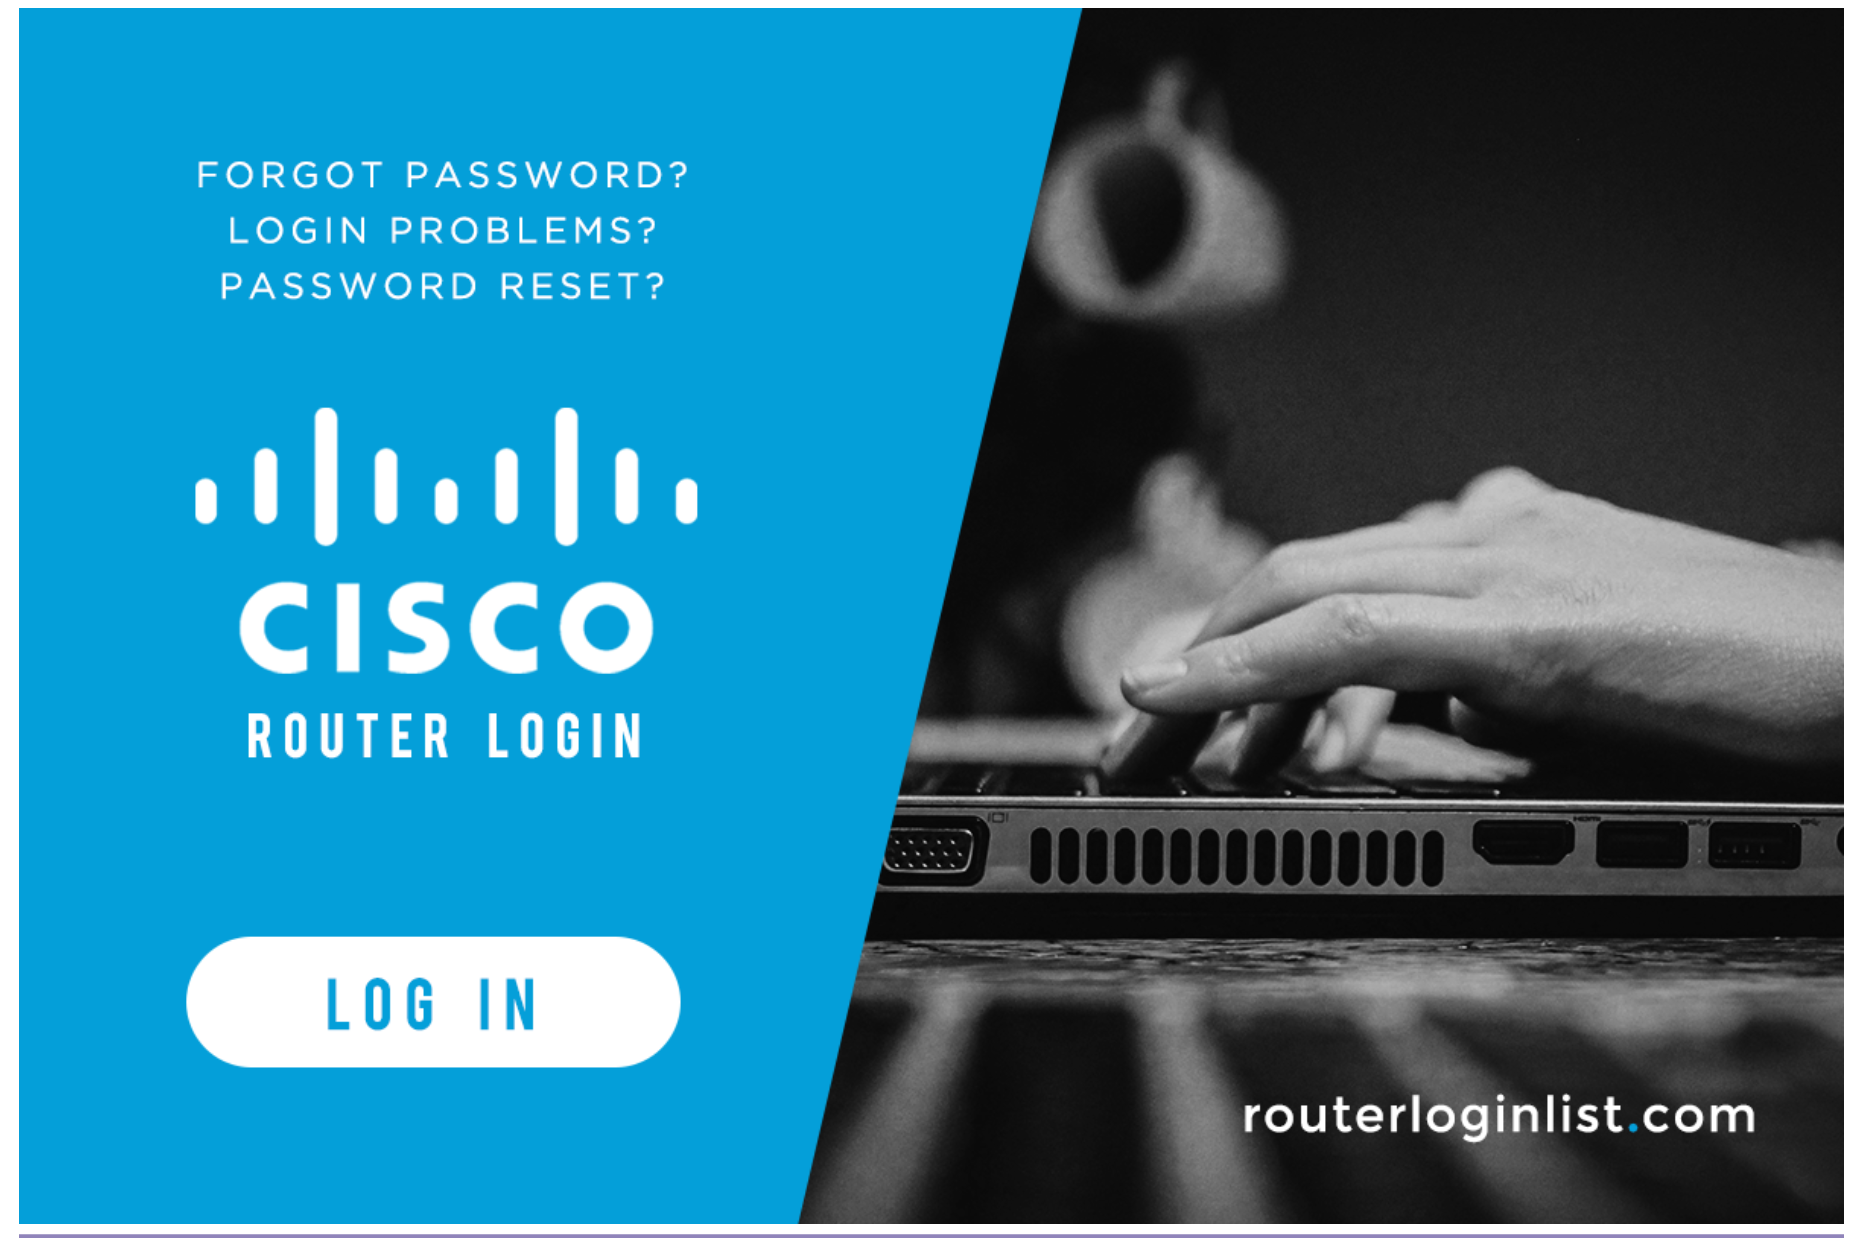 Cisco Router Login - How to Log in to a Cisco Router